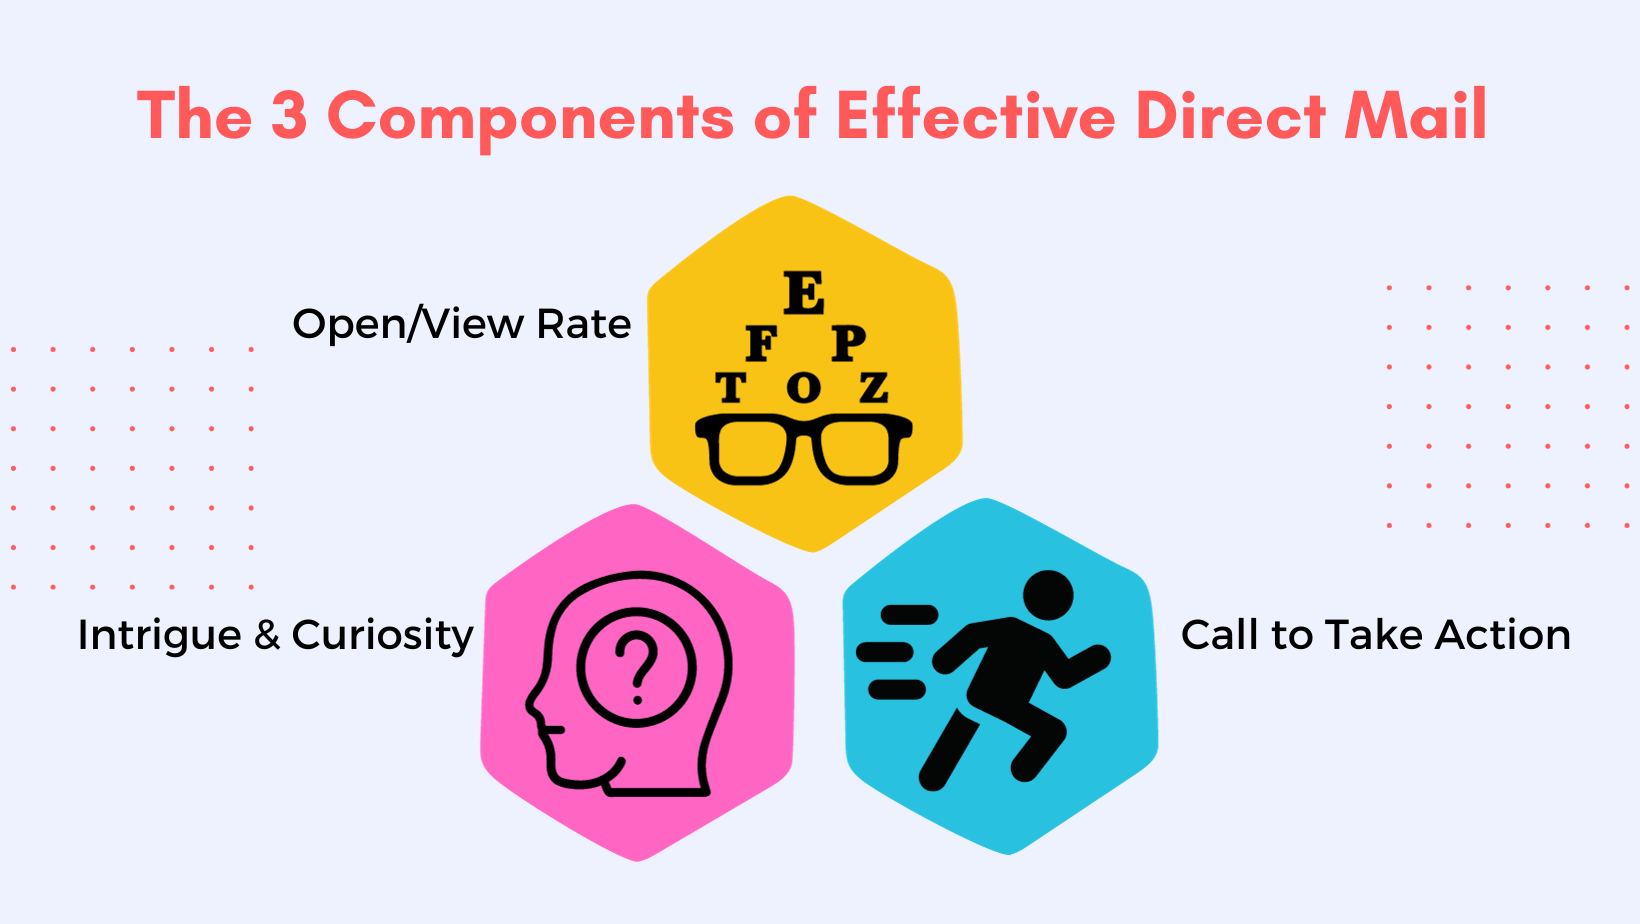 The 3 Components of Effective Direct Mail